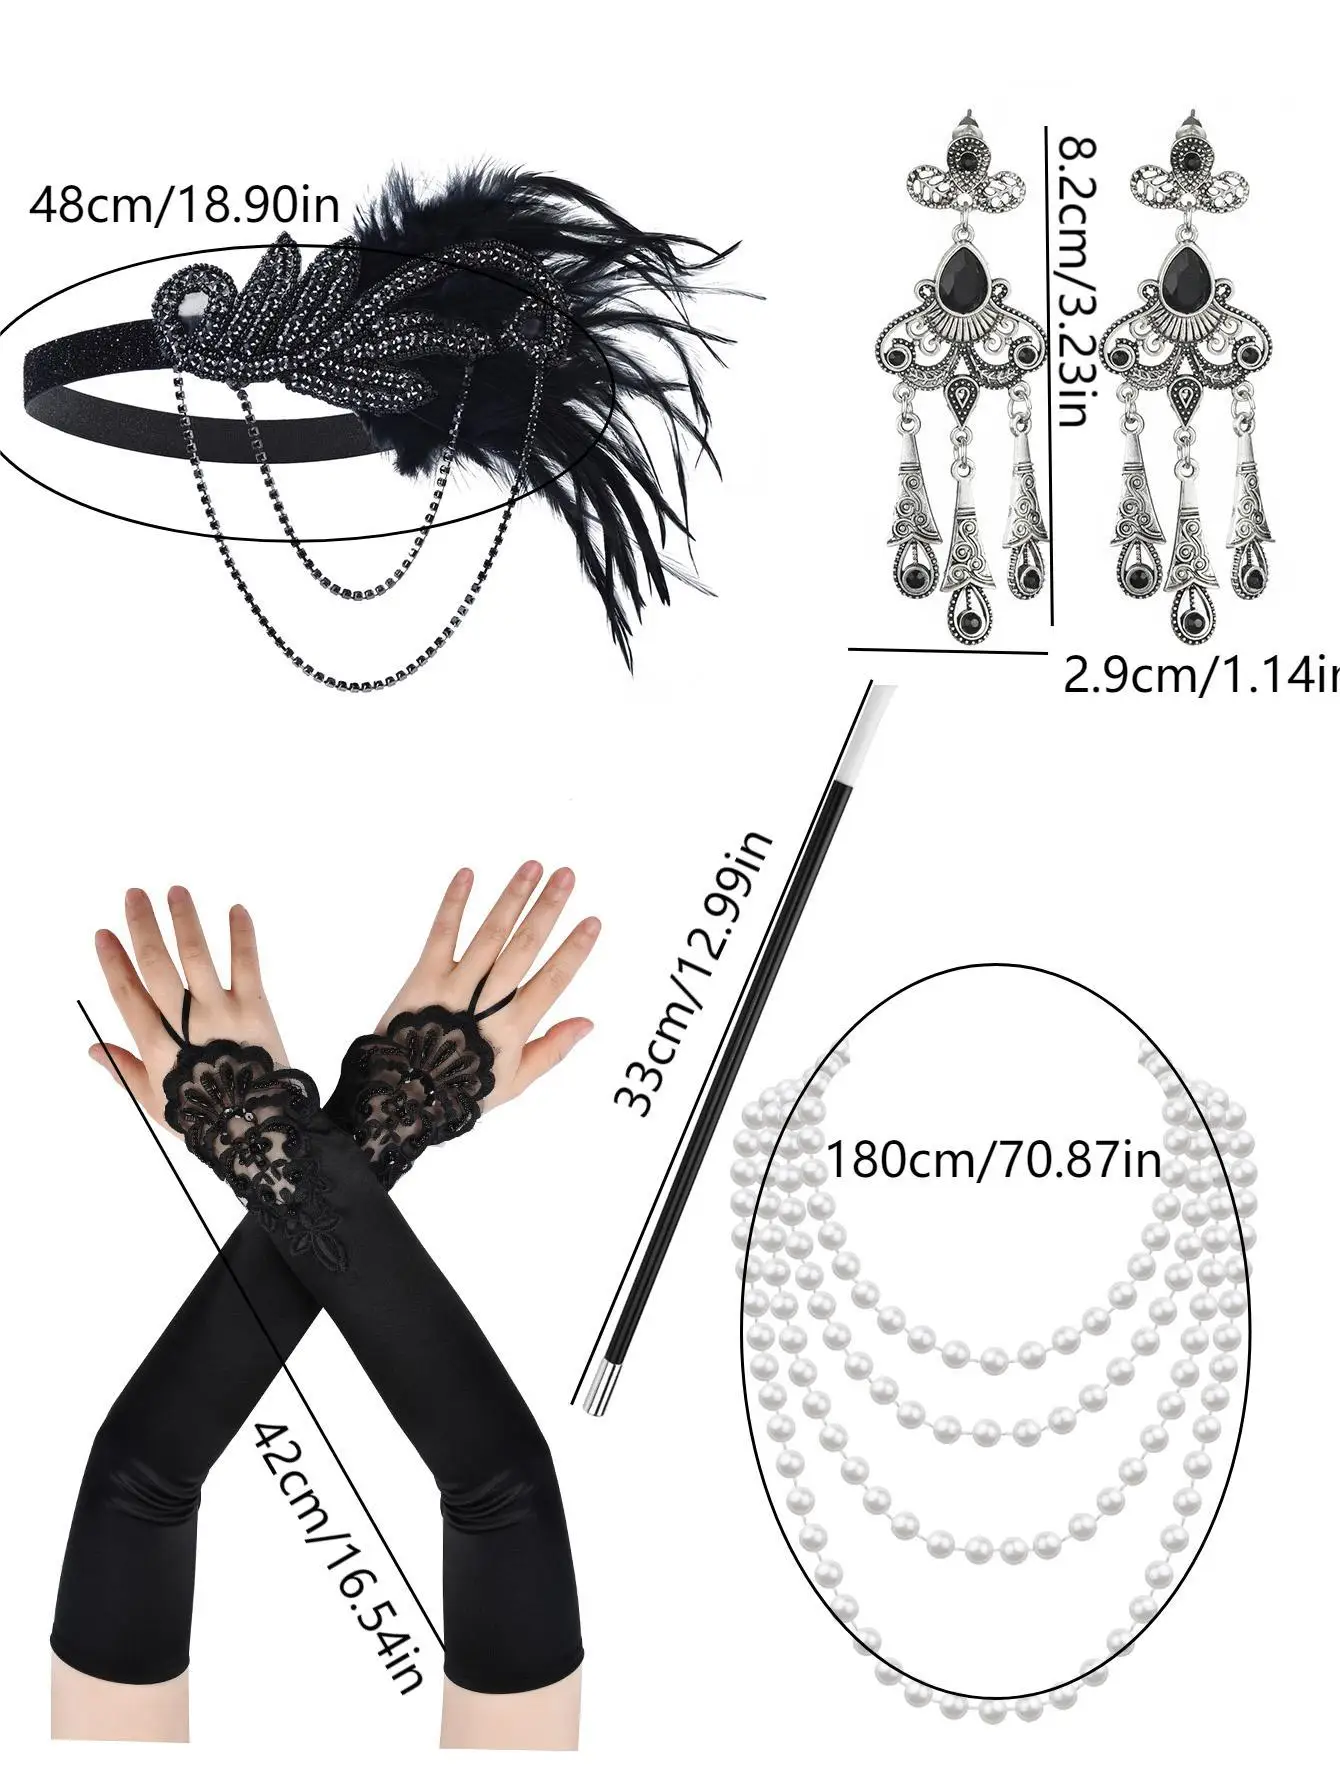 5PCS 1920s Flapper Dress Accessories Retro Party Props GATSBY CHARLESTON Headband Pearl Necklace Feather Band for Wedding